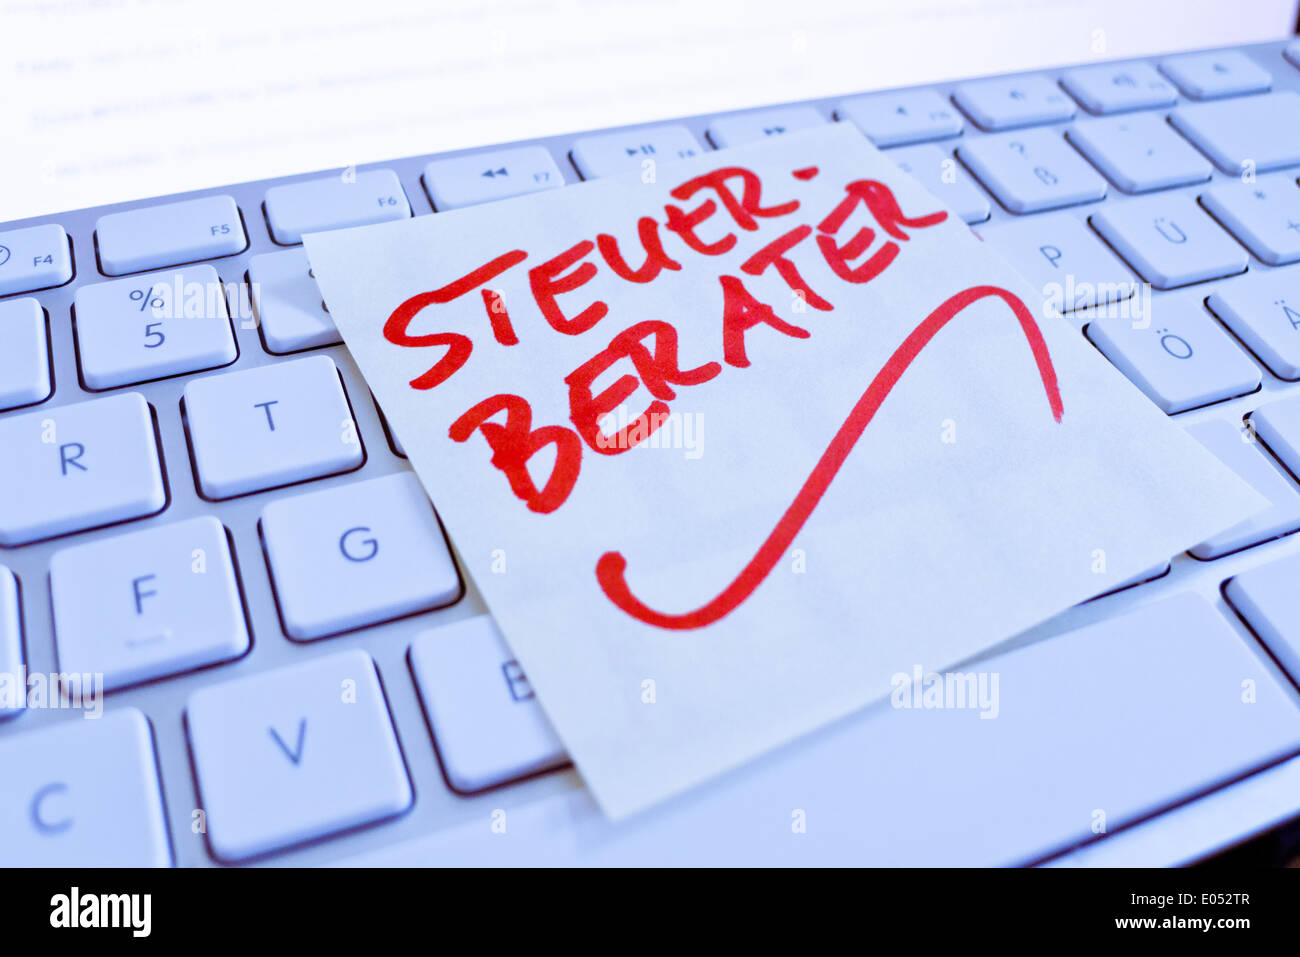 A note slip of paper lies on the keyboard of a computer in memory: Tax adviser, Stock Photo